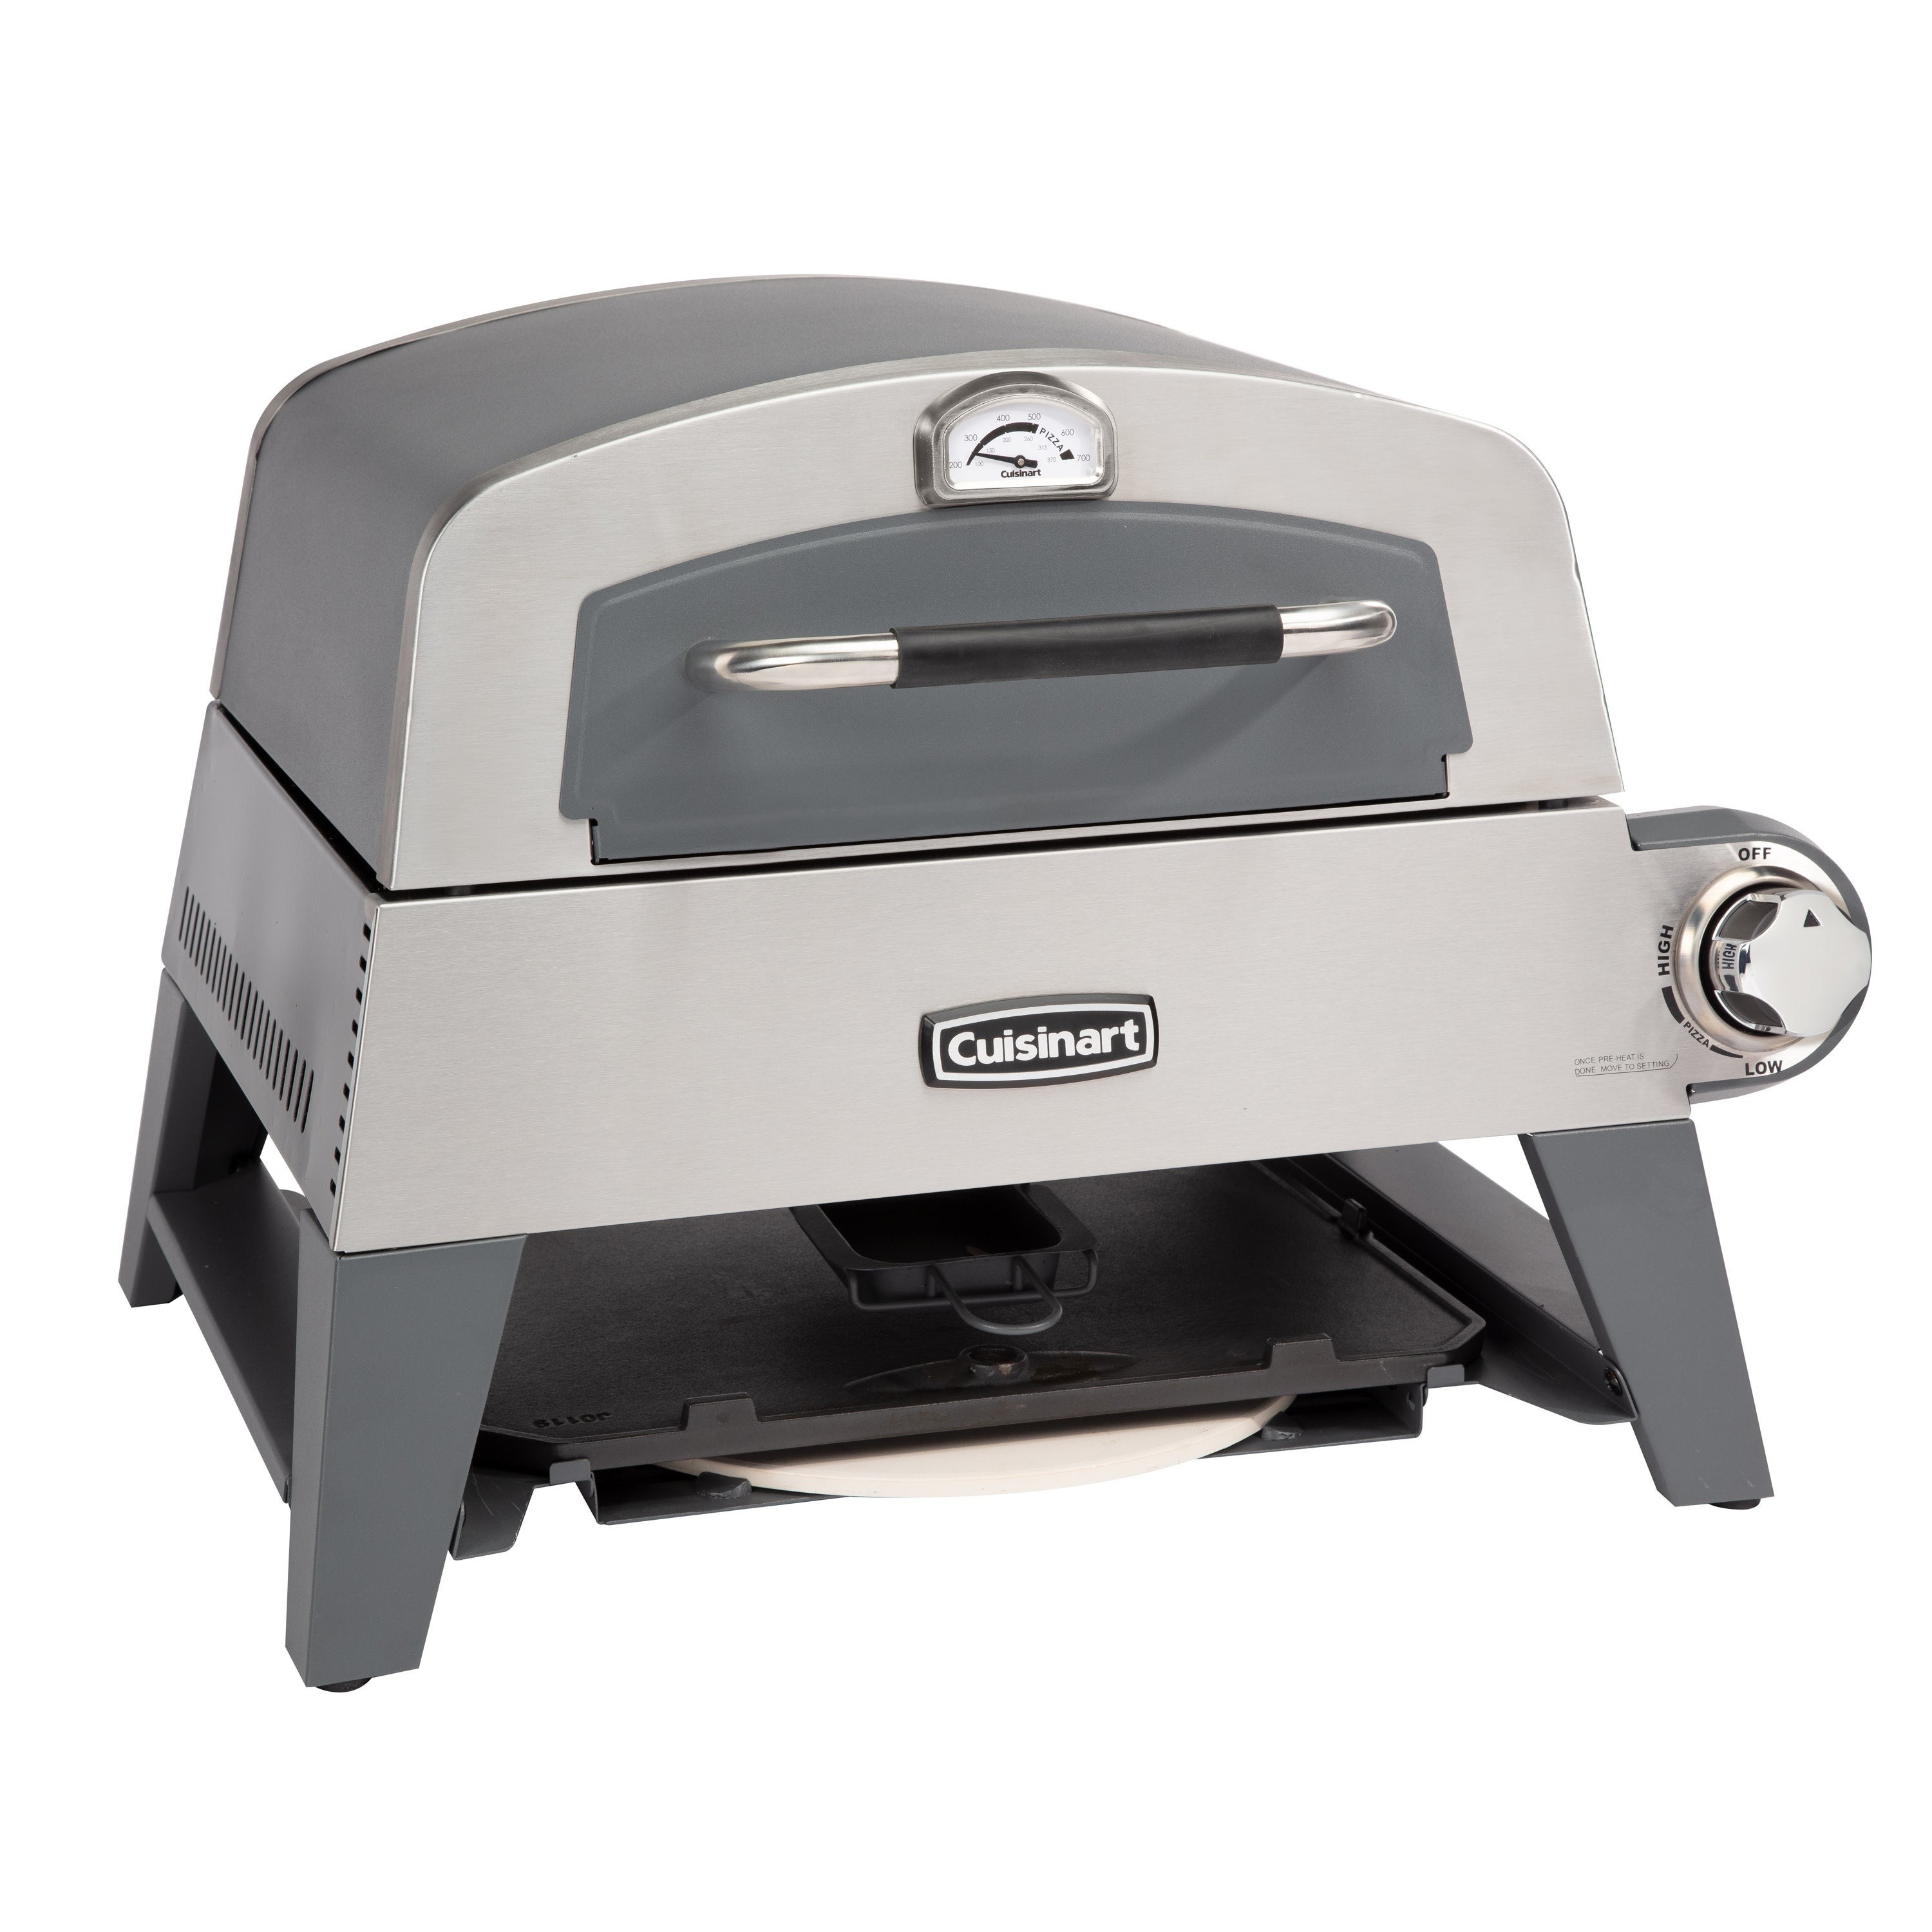 3-in-1 Pizza Oven Plus w/ Griddle & Grill